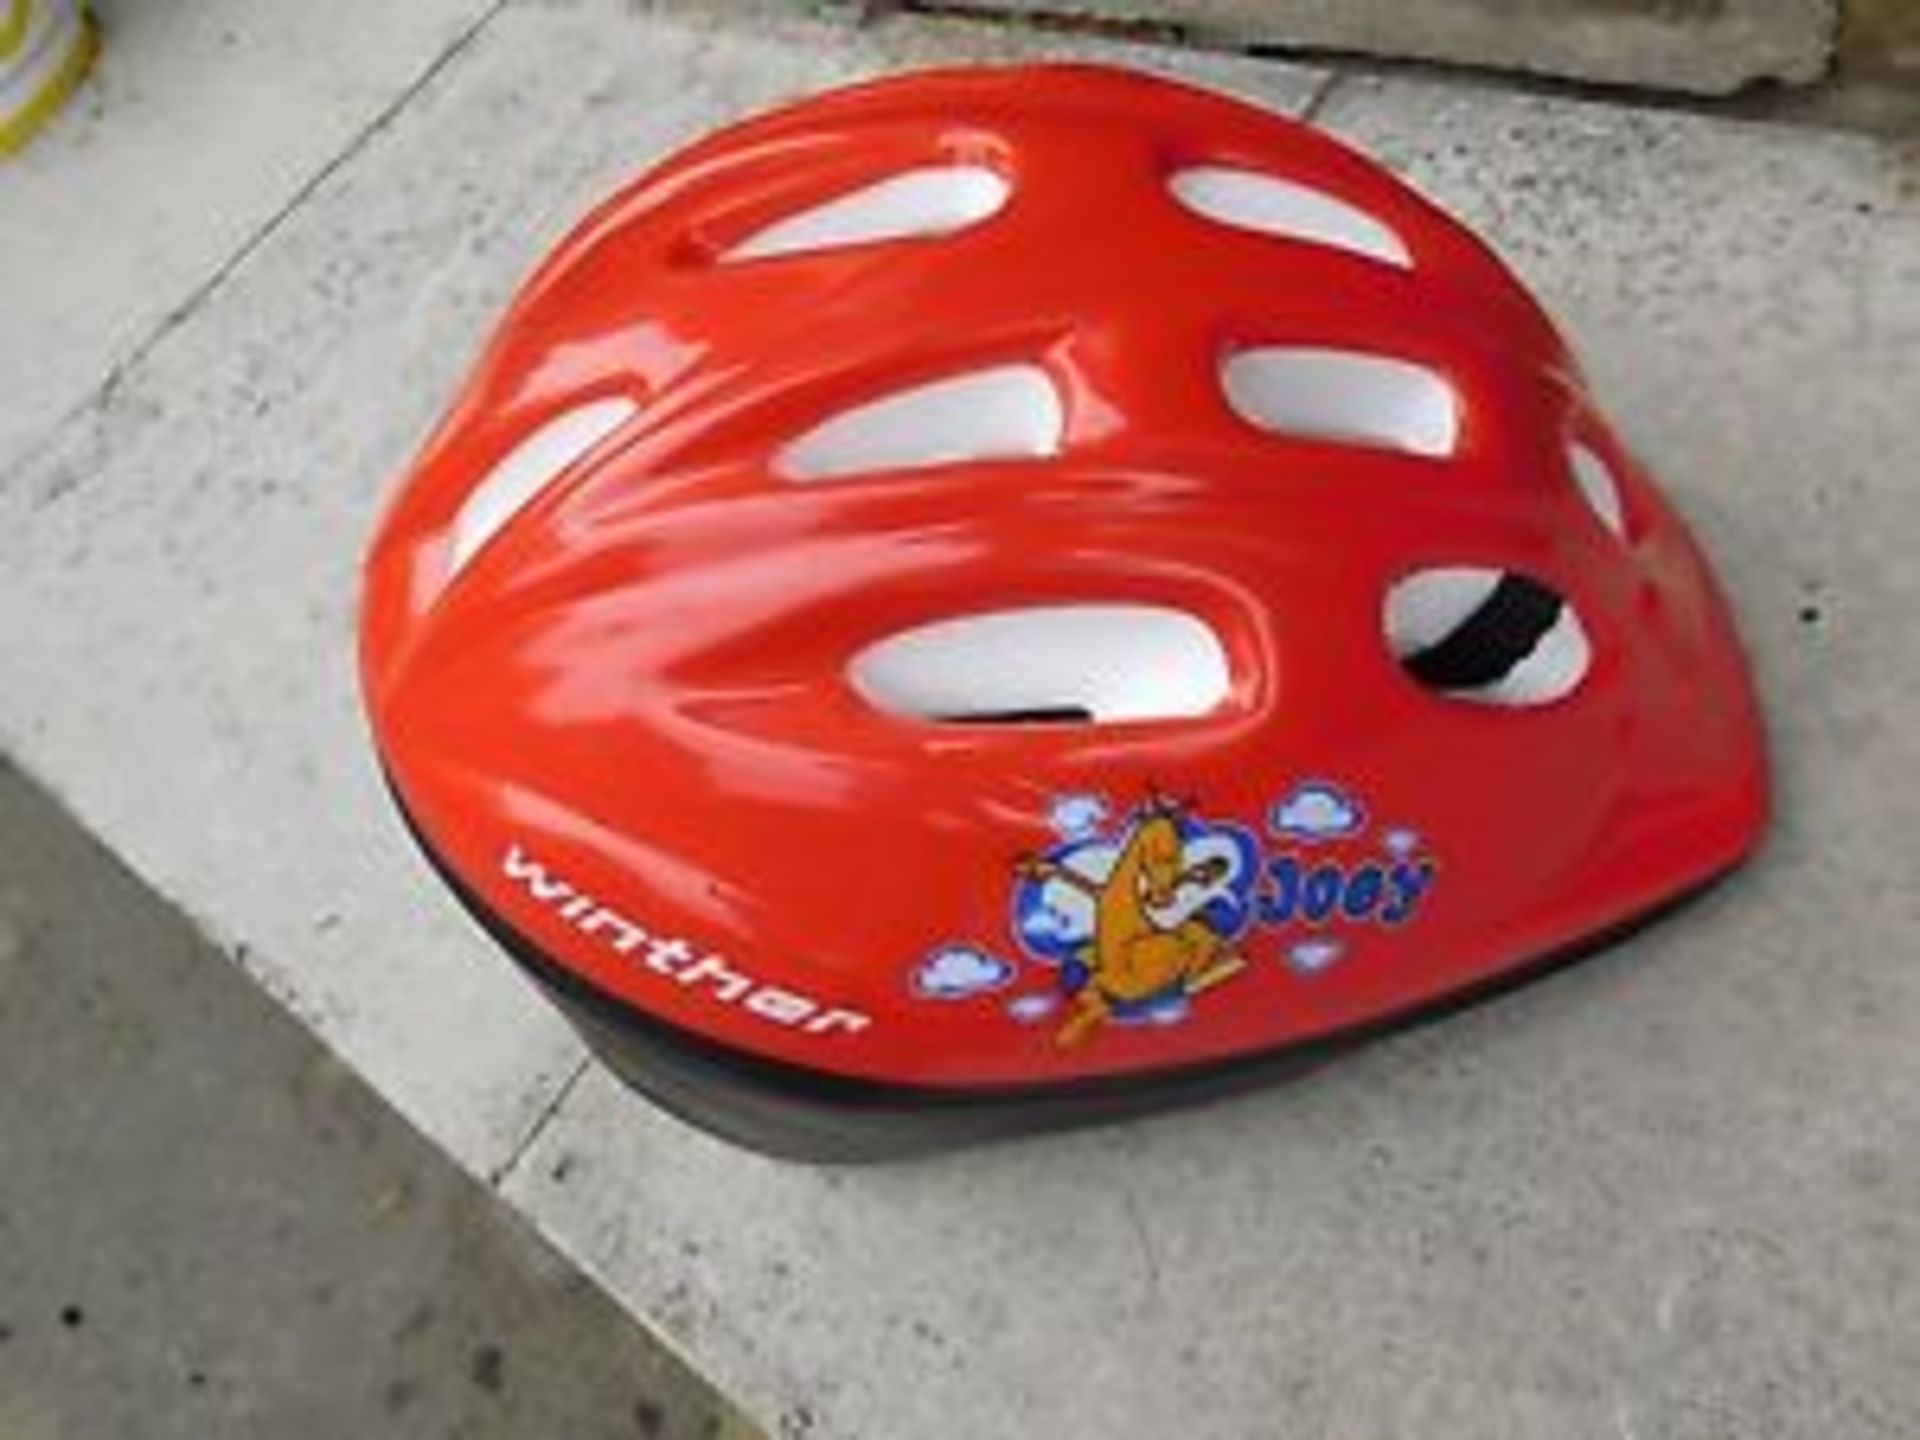 V Brand New Childs Red Joey Cycle Helmet Size M X 2 YOUR BID PRICE TO BE MULTIPLIED BY TWO